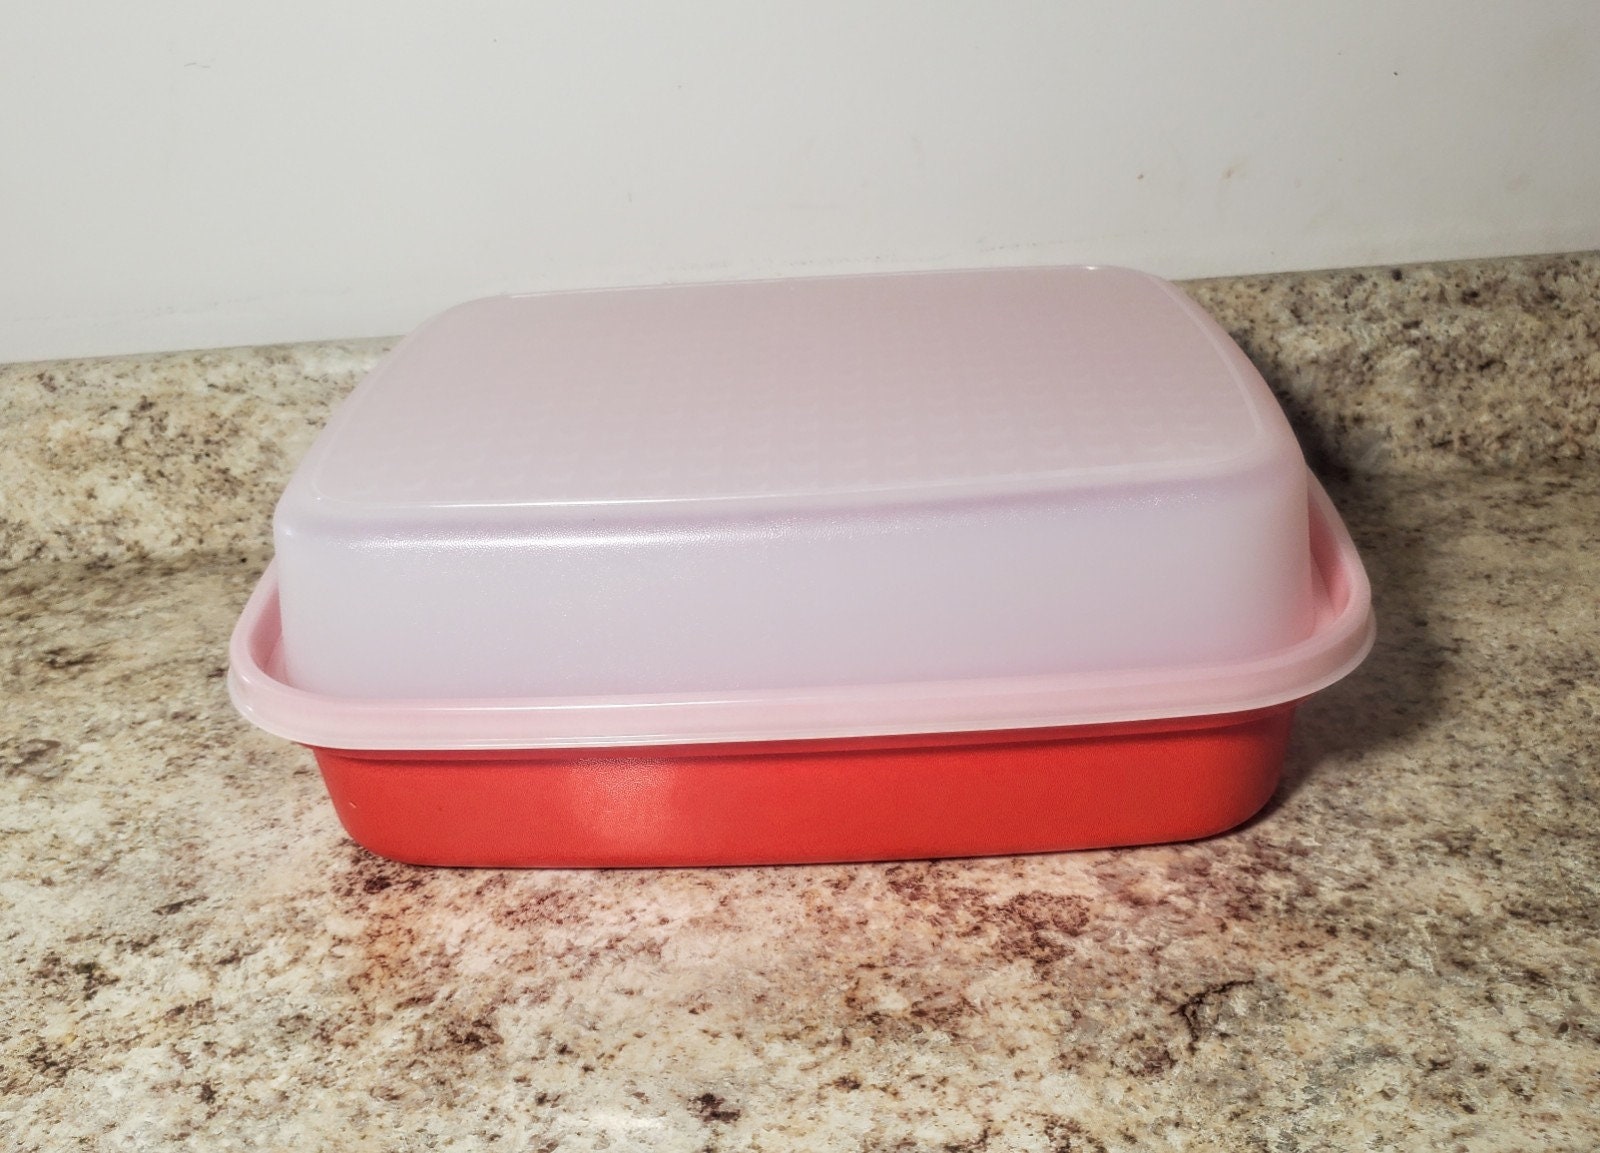 HUGE Tupperware container, I love this!! So cheery!